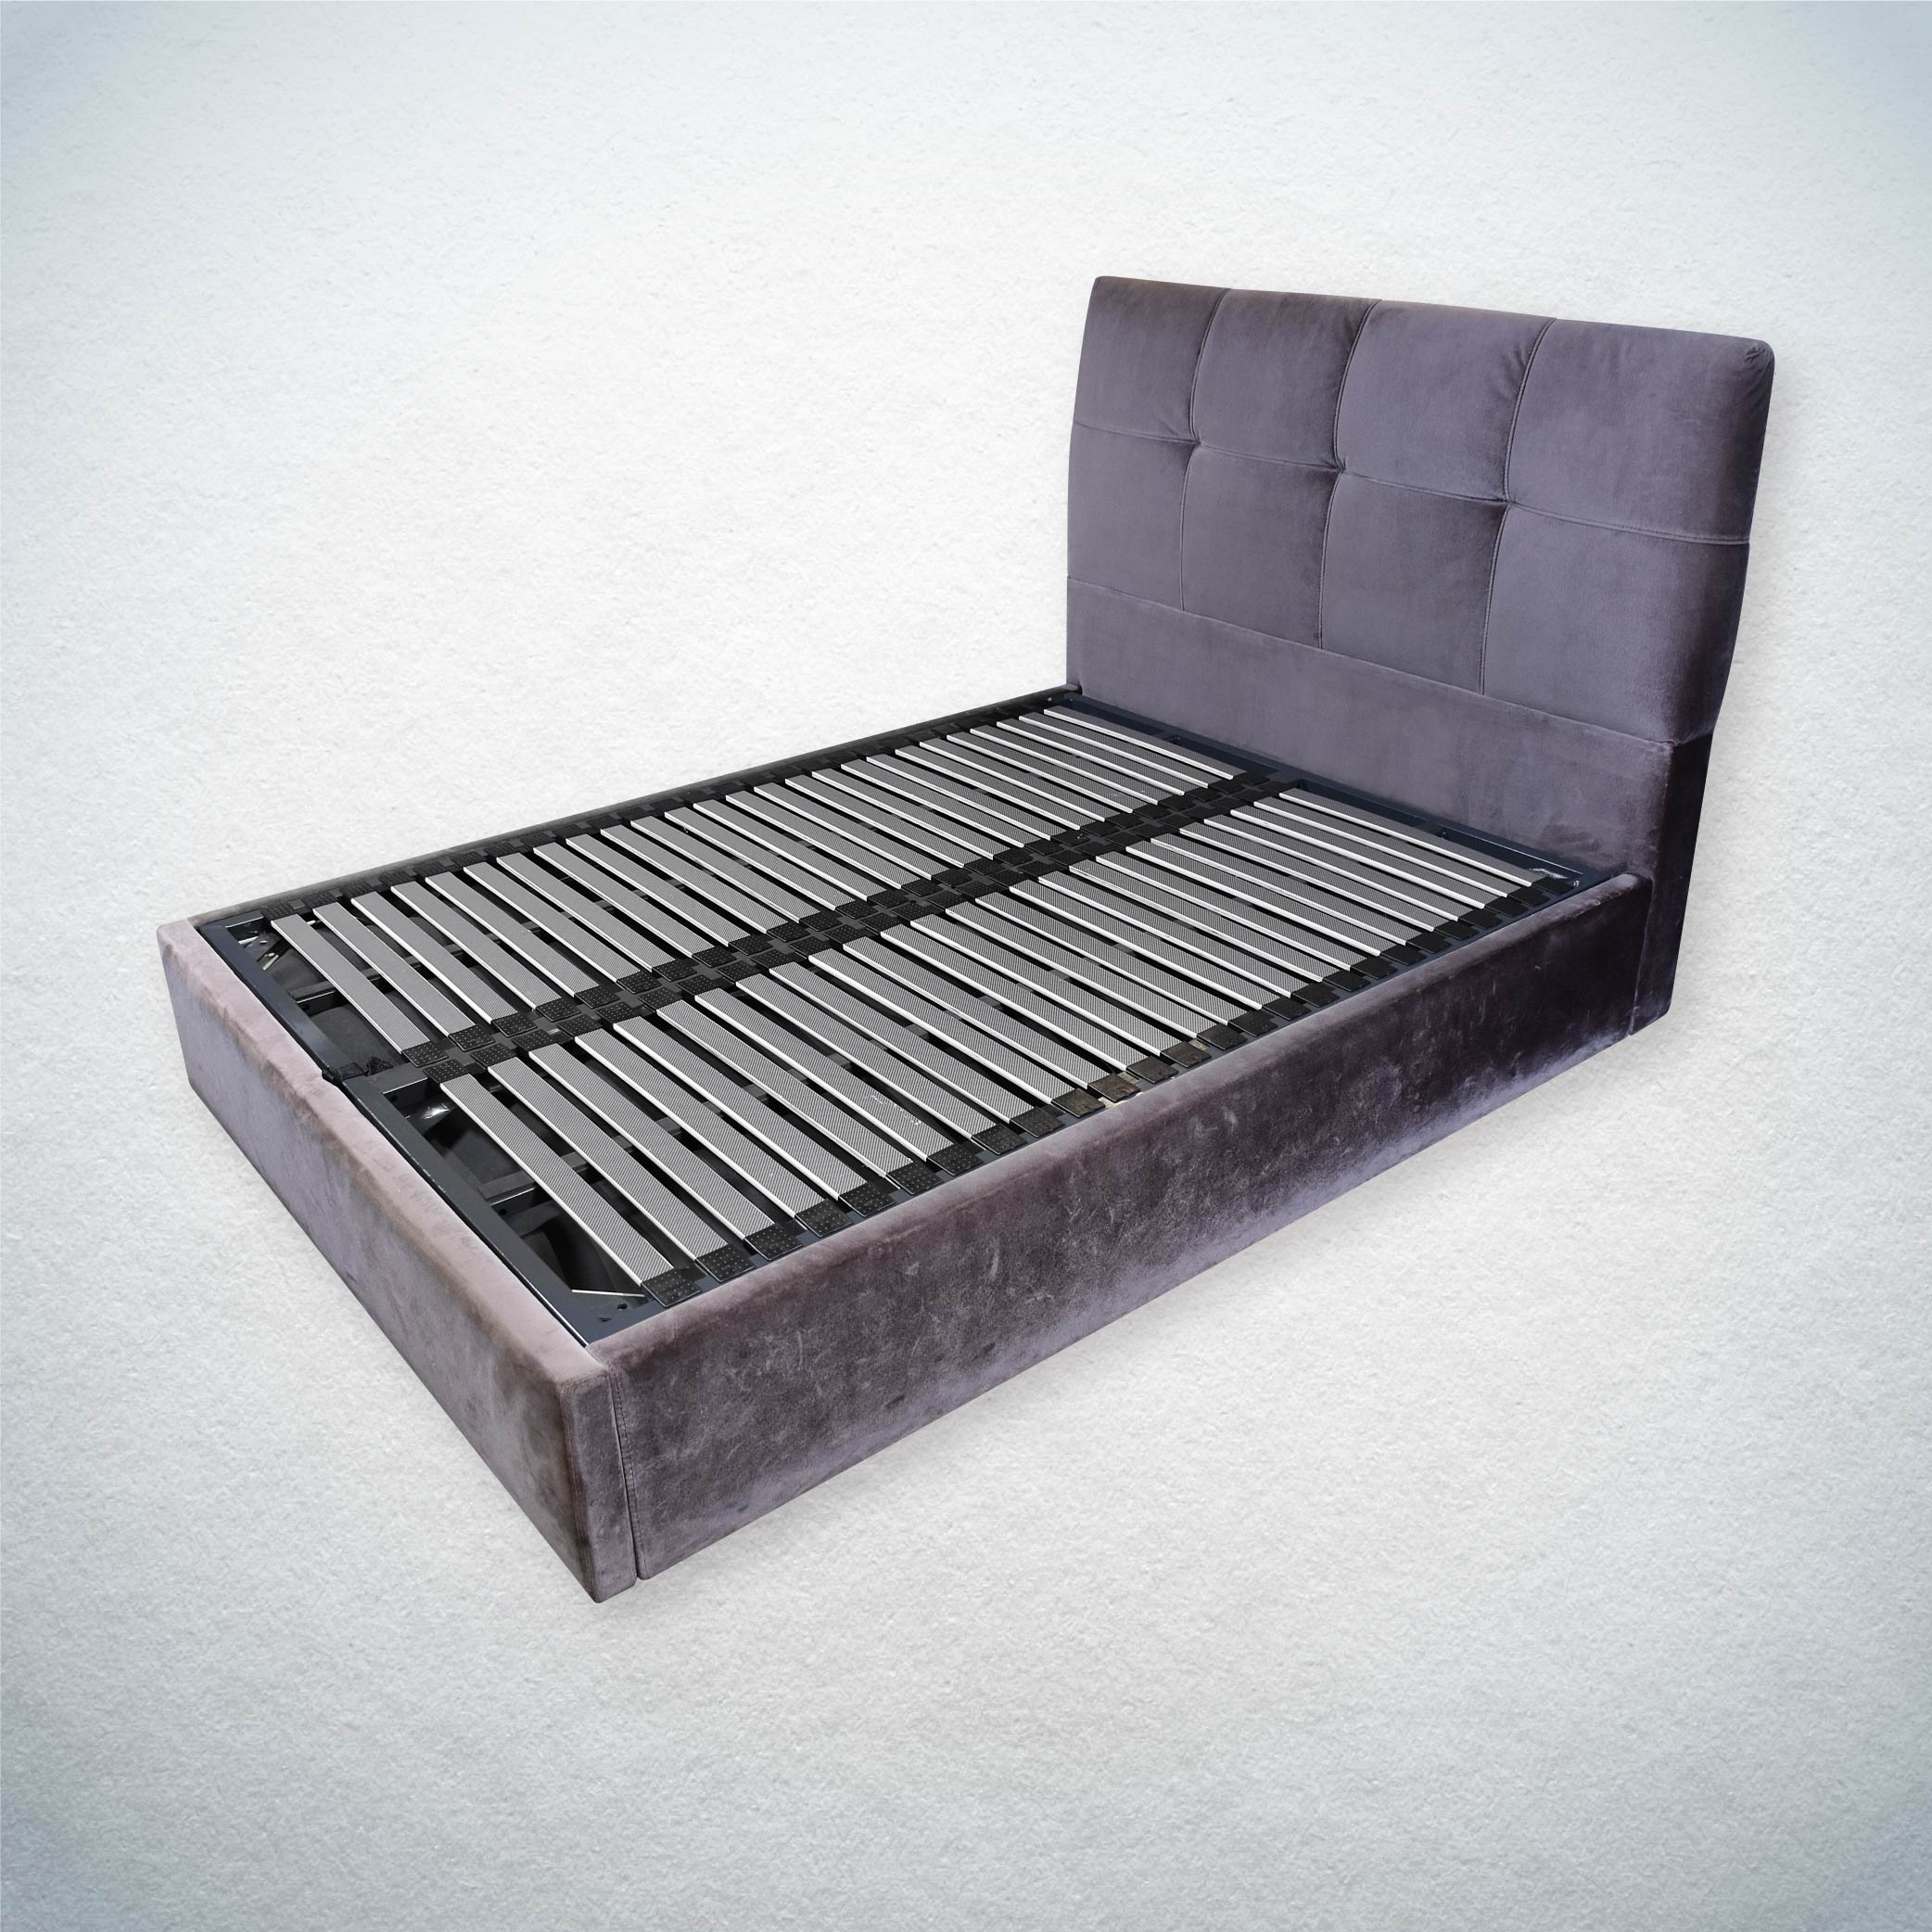 Hydraulic Storage with Slats Bed Frame - Prime